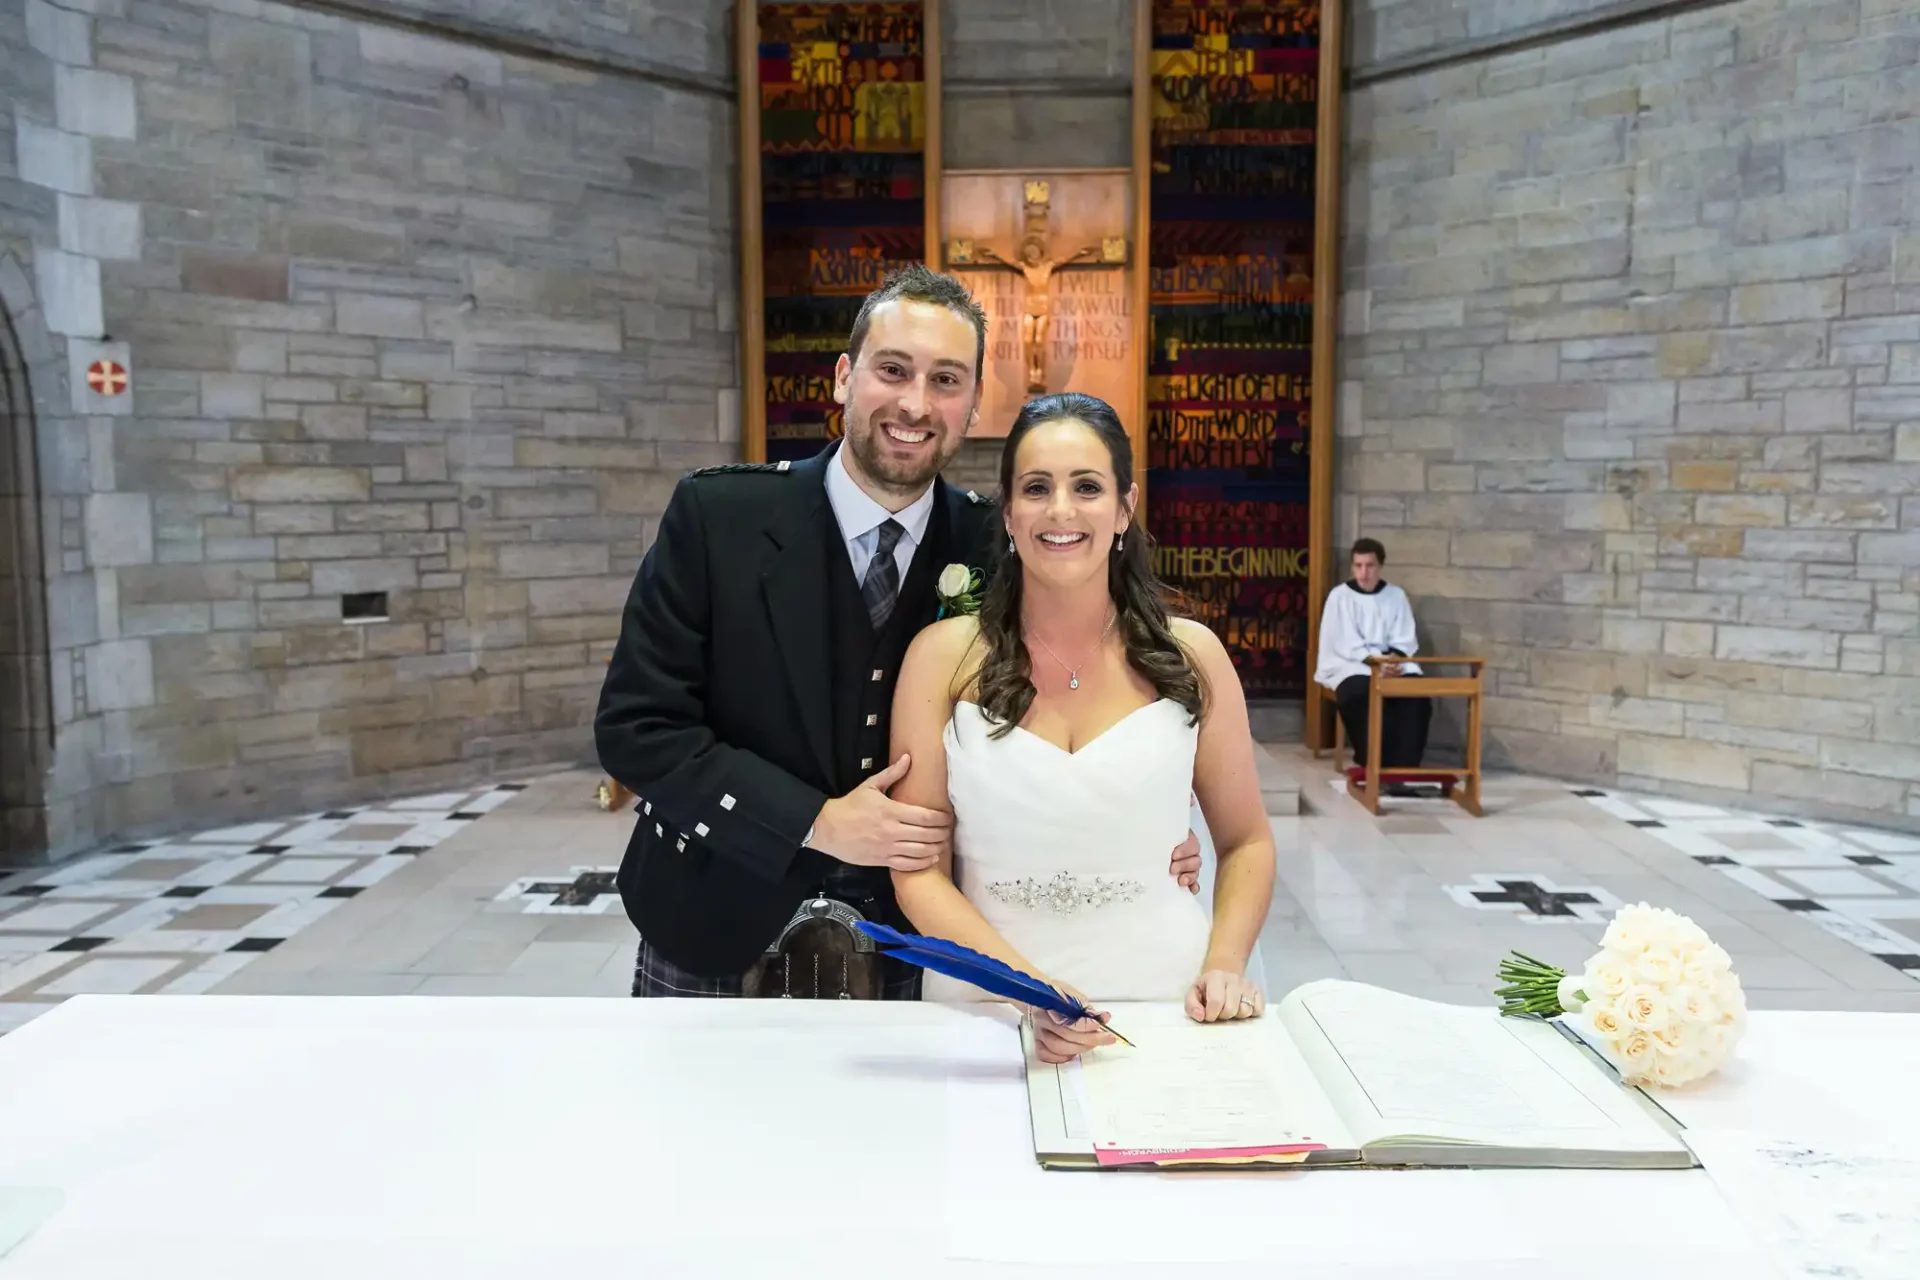 A bride and groom smiling at the camera while signing a registry book in a church with stained glass windows in the background.